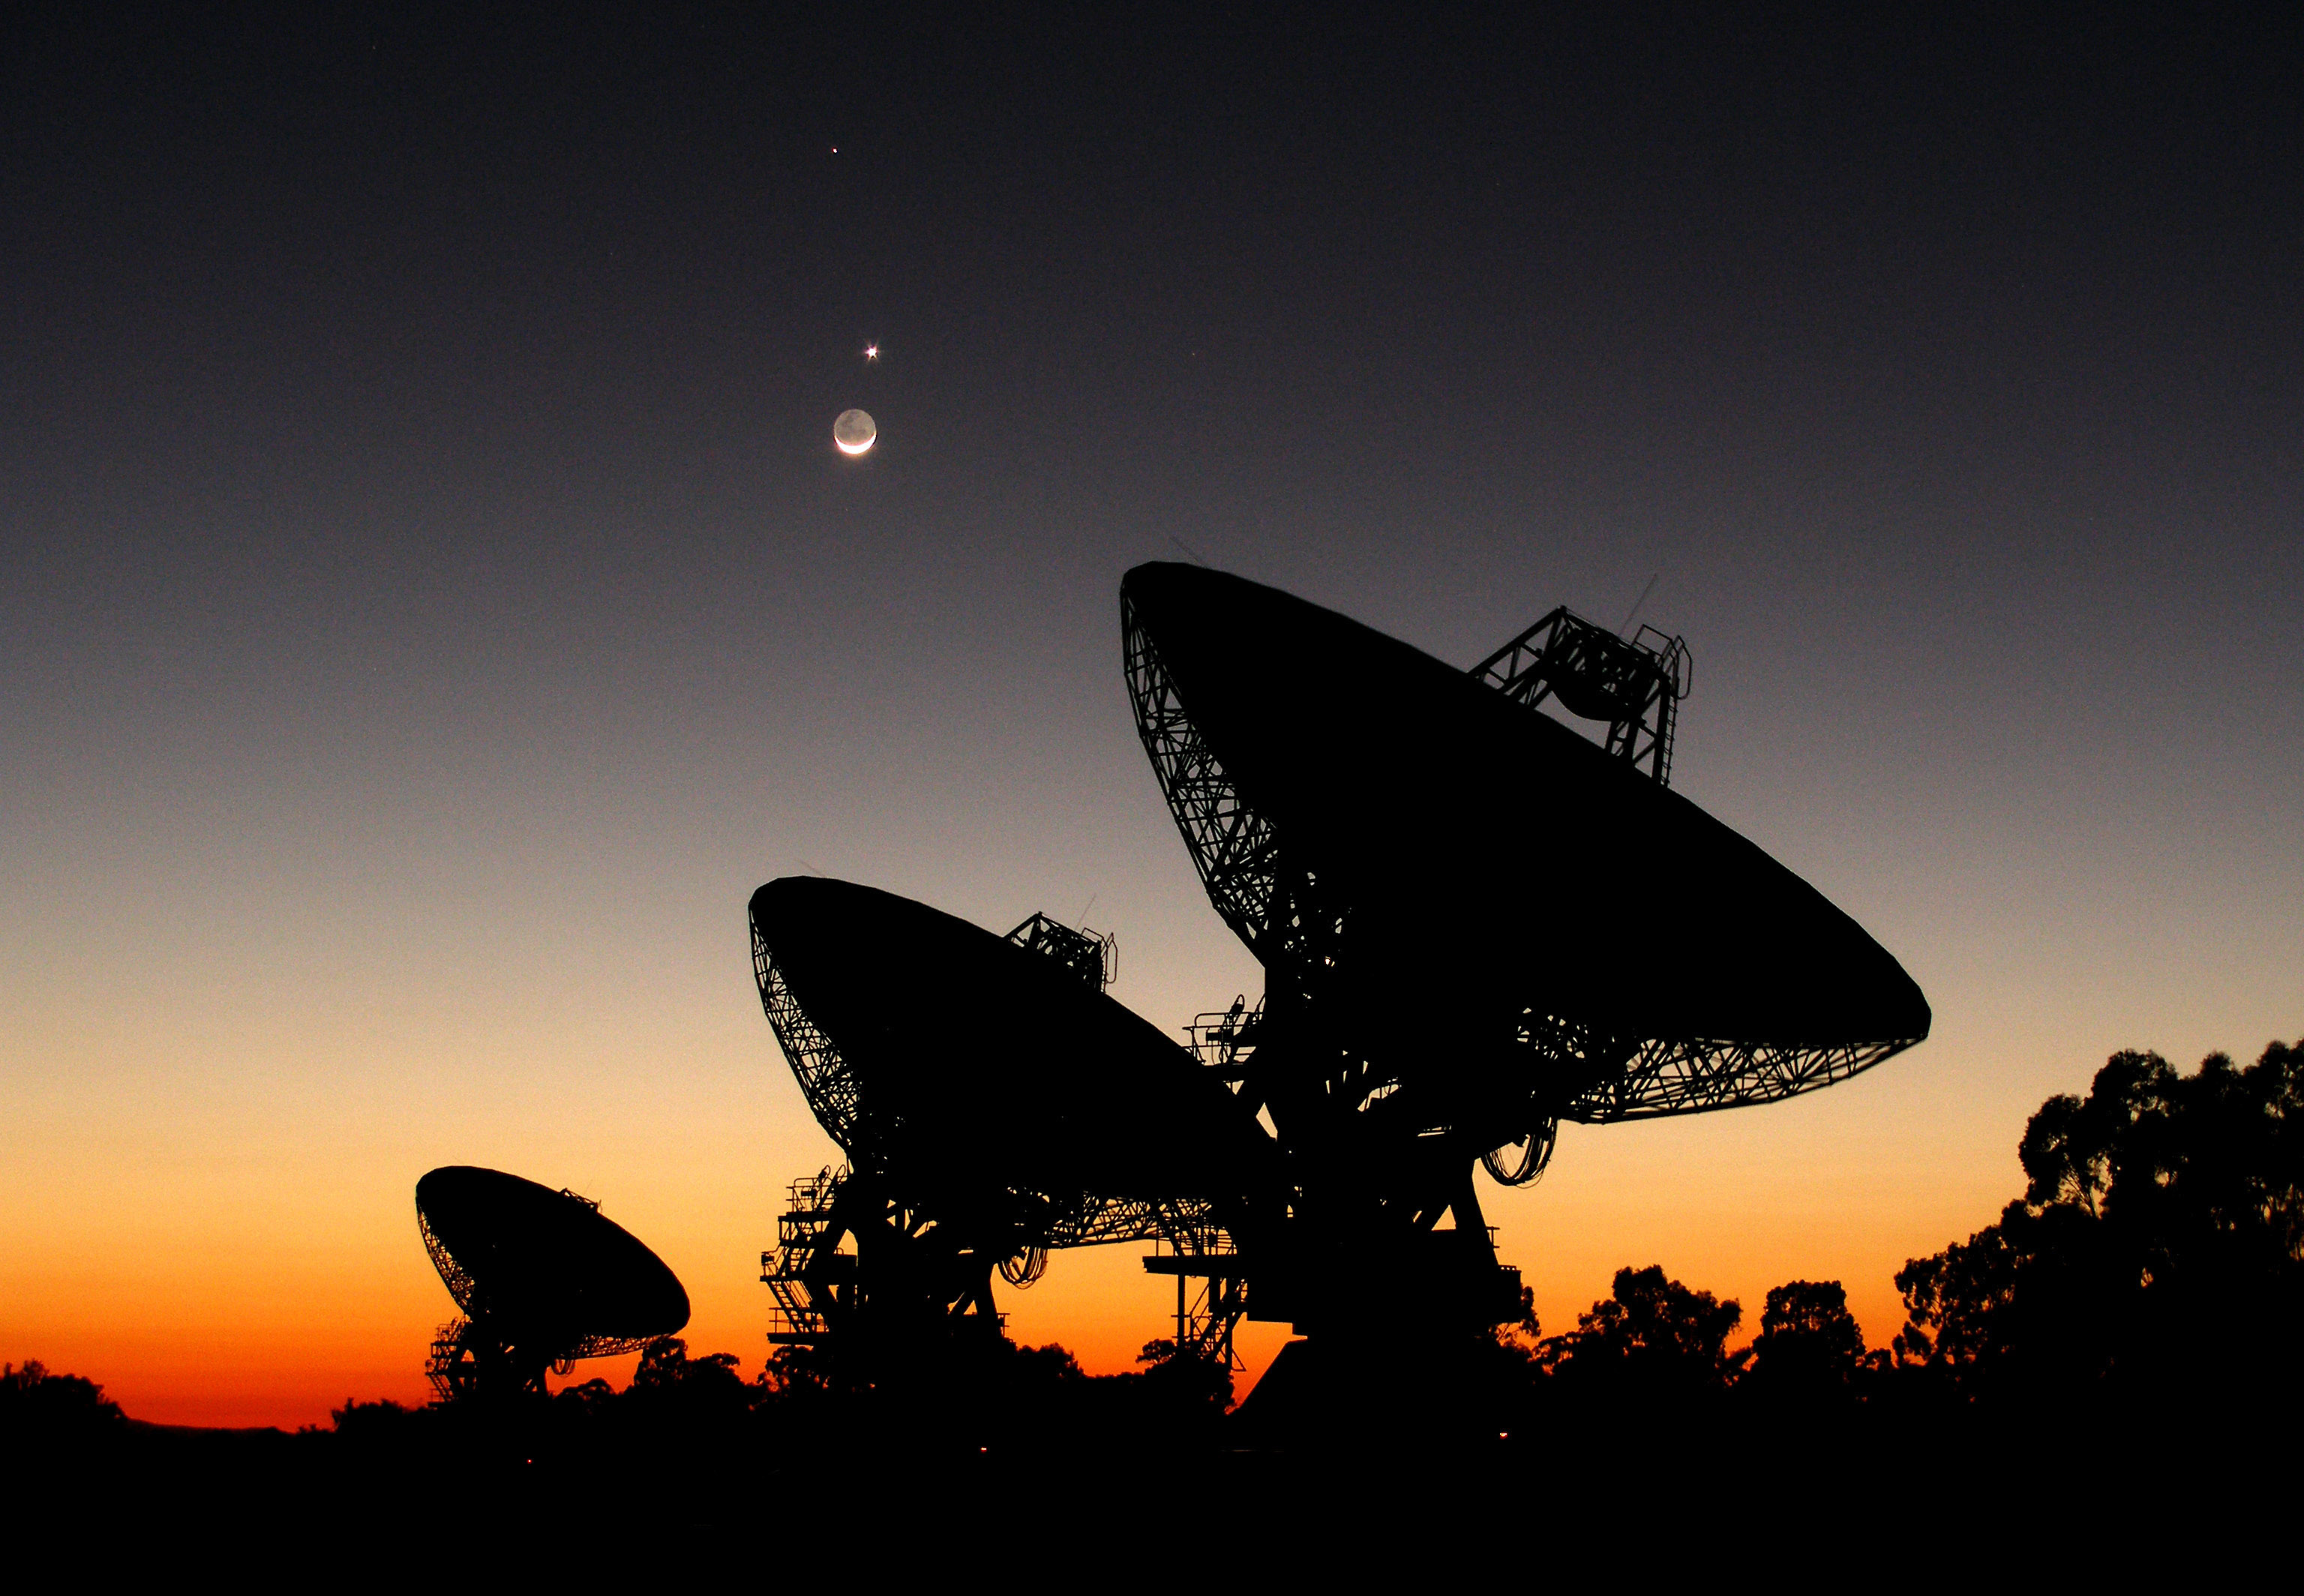 The SETI Institute has recently undergone a search for alien radio signals around the star KIC 8462852, whose mysterious brightness fluctuations have been considered to be the workings of an extraterrestrial civilisation. Following a thoroiugh search in a wide range of frequencies, SETI reported that it has detected no such signals that could be of artificial origin. Image Credit: Graeme L. White & Glen Cozens (James Cook University) 